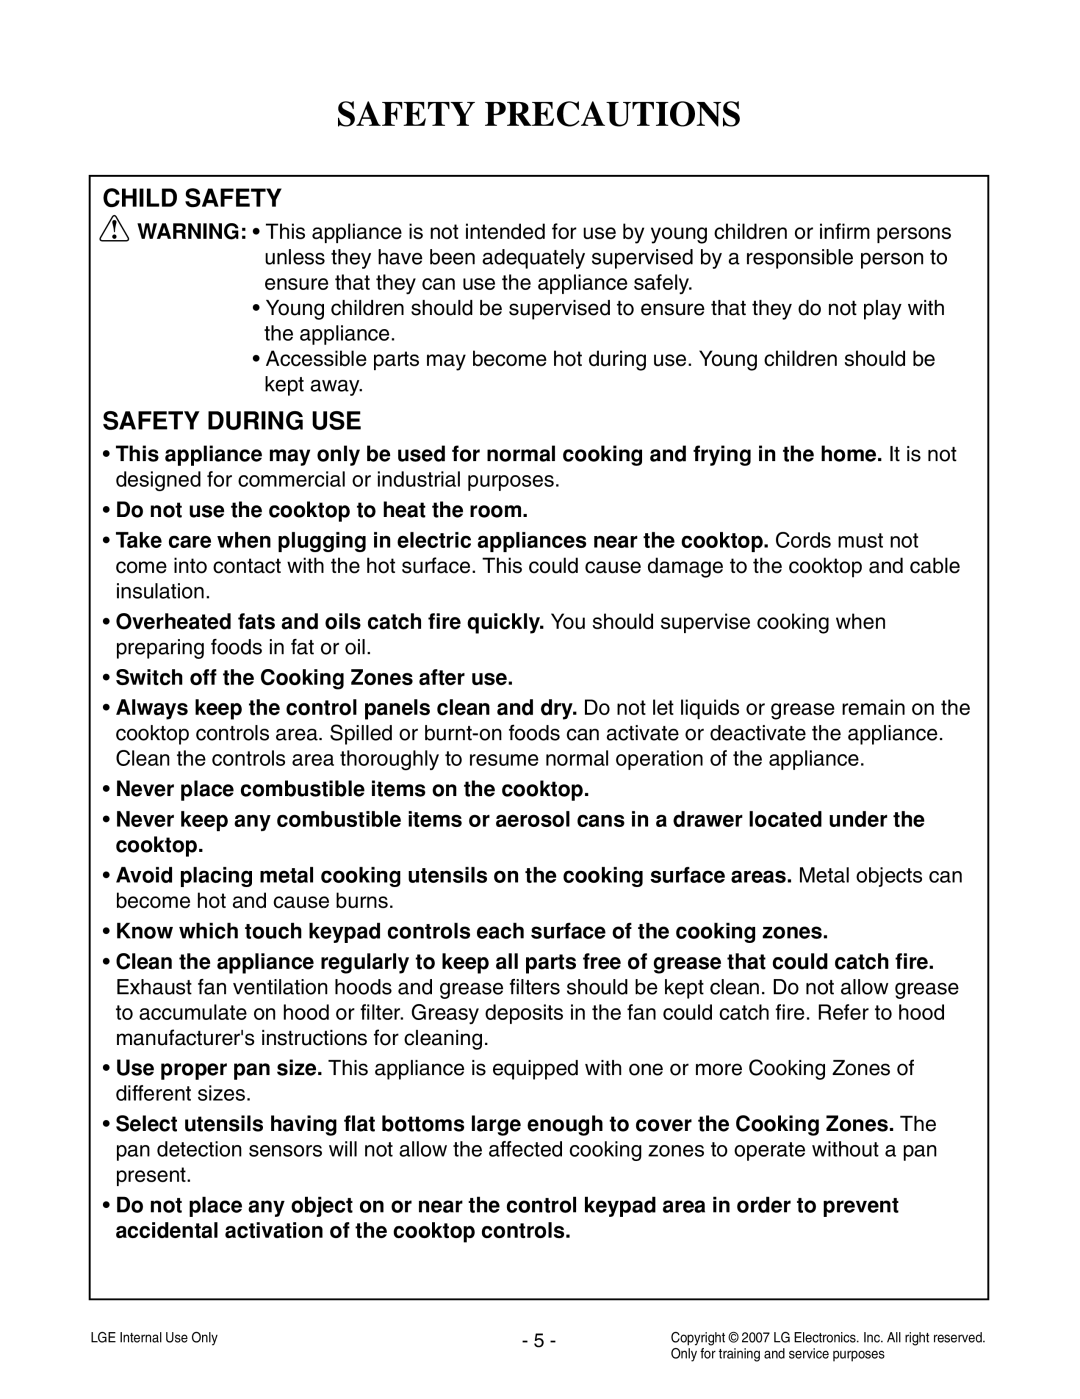 LG Electronics LCE30845 service manual Safety Precautions, Do not use the cooktop to heat the room 